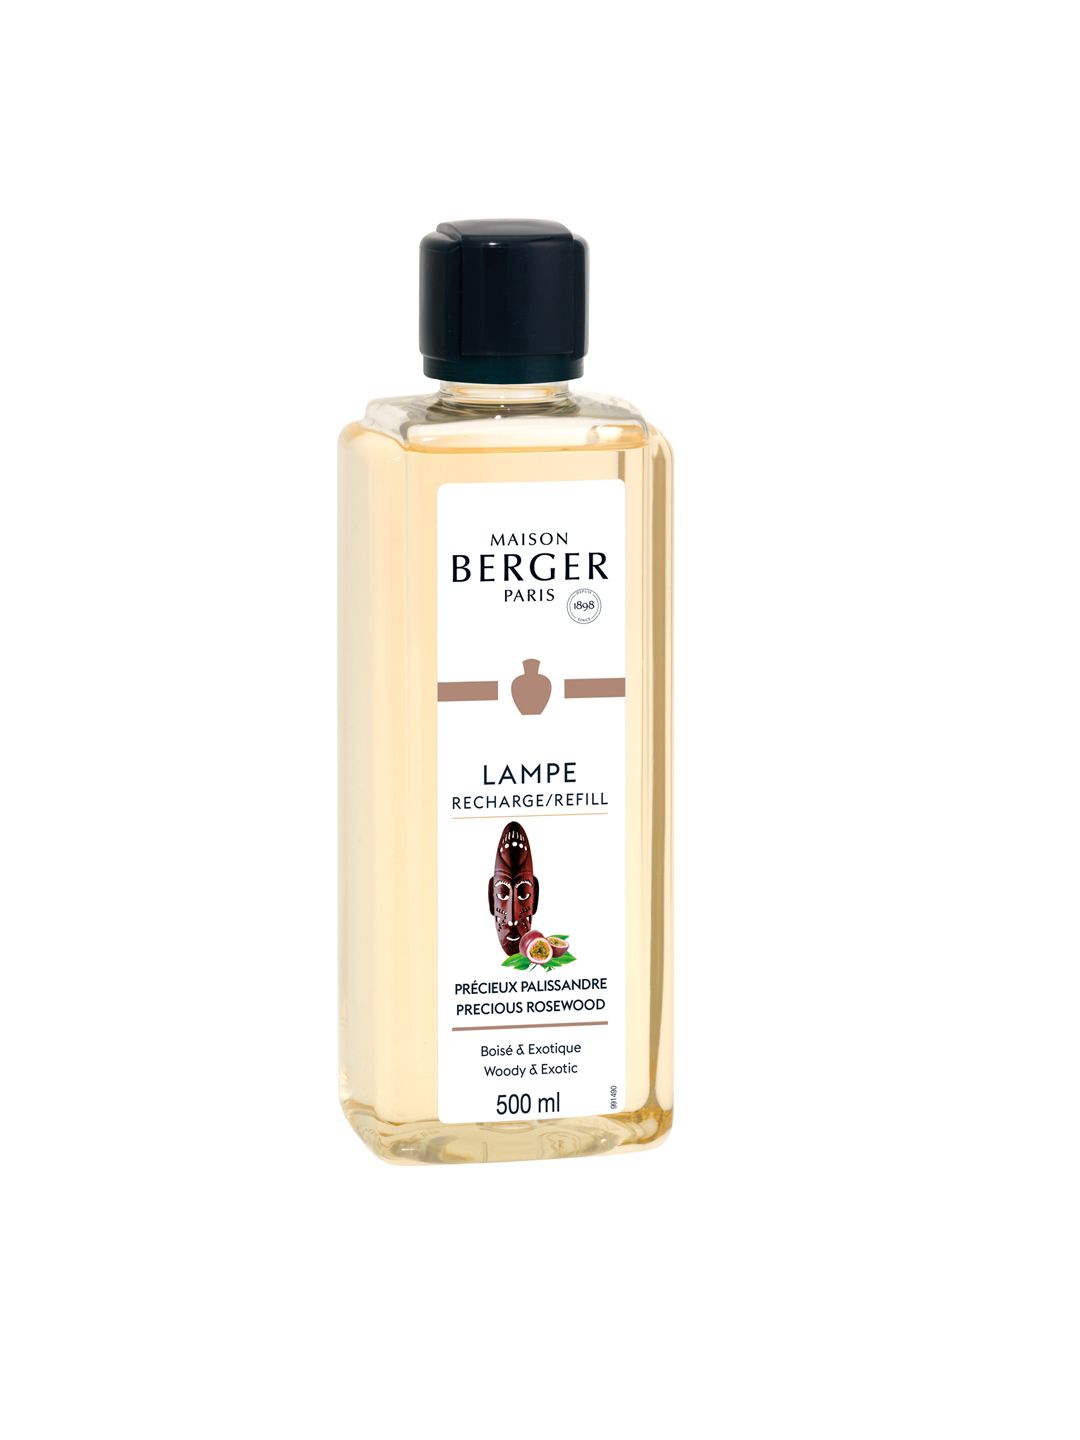 MAISON BERGER Precious Rosewood Aroma Oil 500 ml Price in India